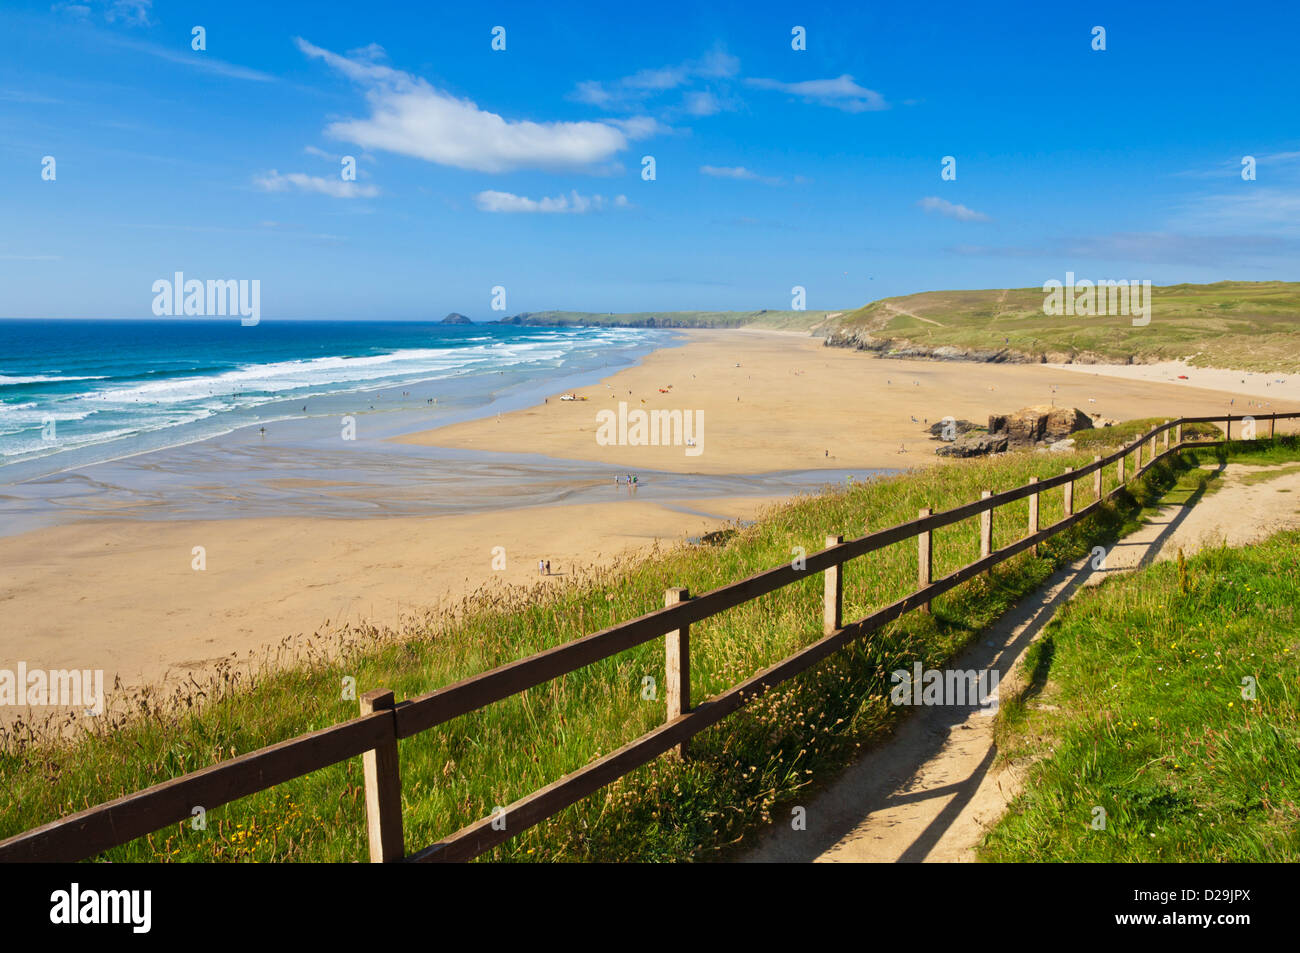 Holidaymakers on the wide long sandy beach at Perranporth Cornwall, England, GB, UK, EU, Europe Stock Photo